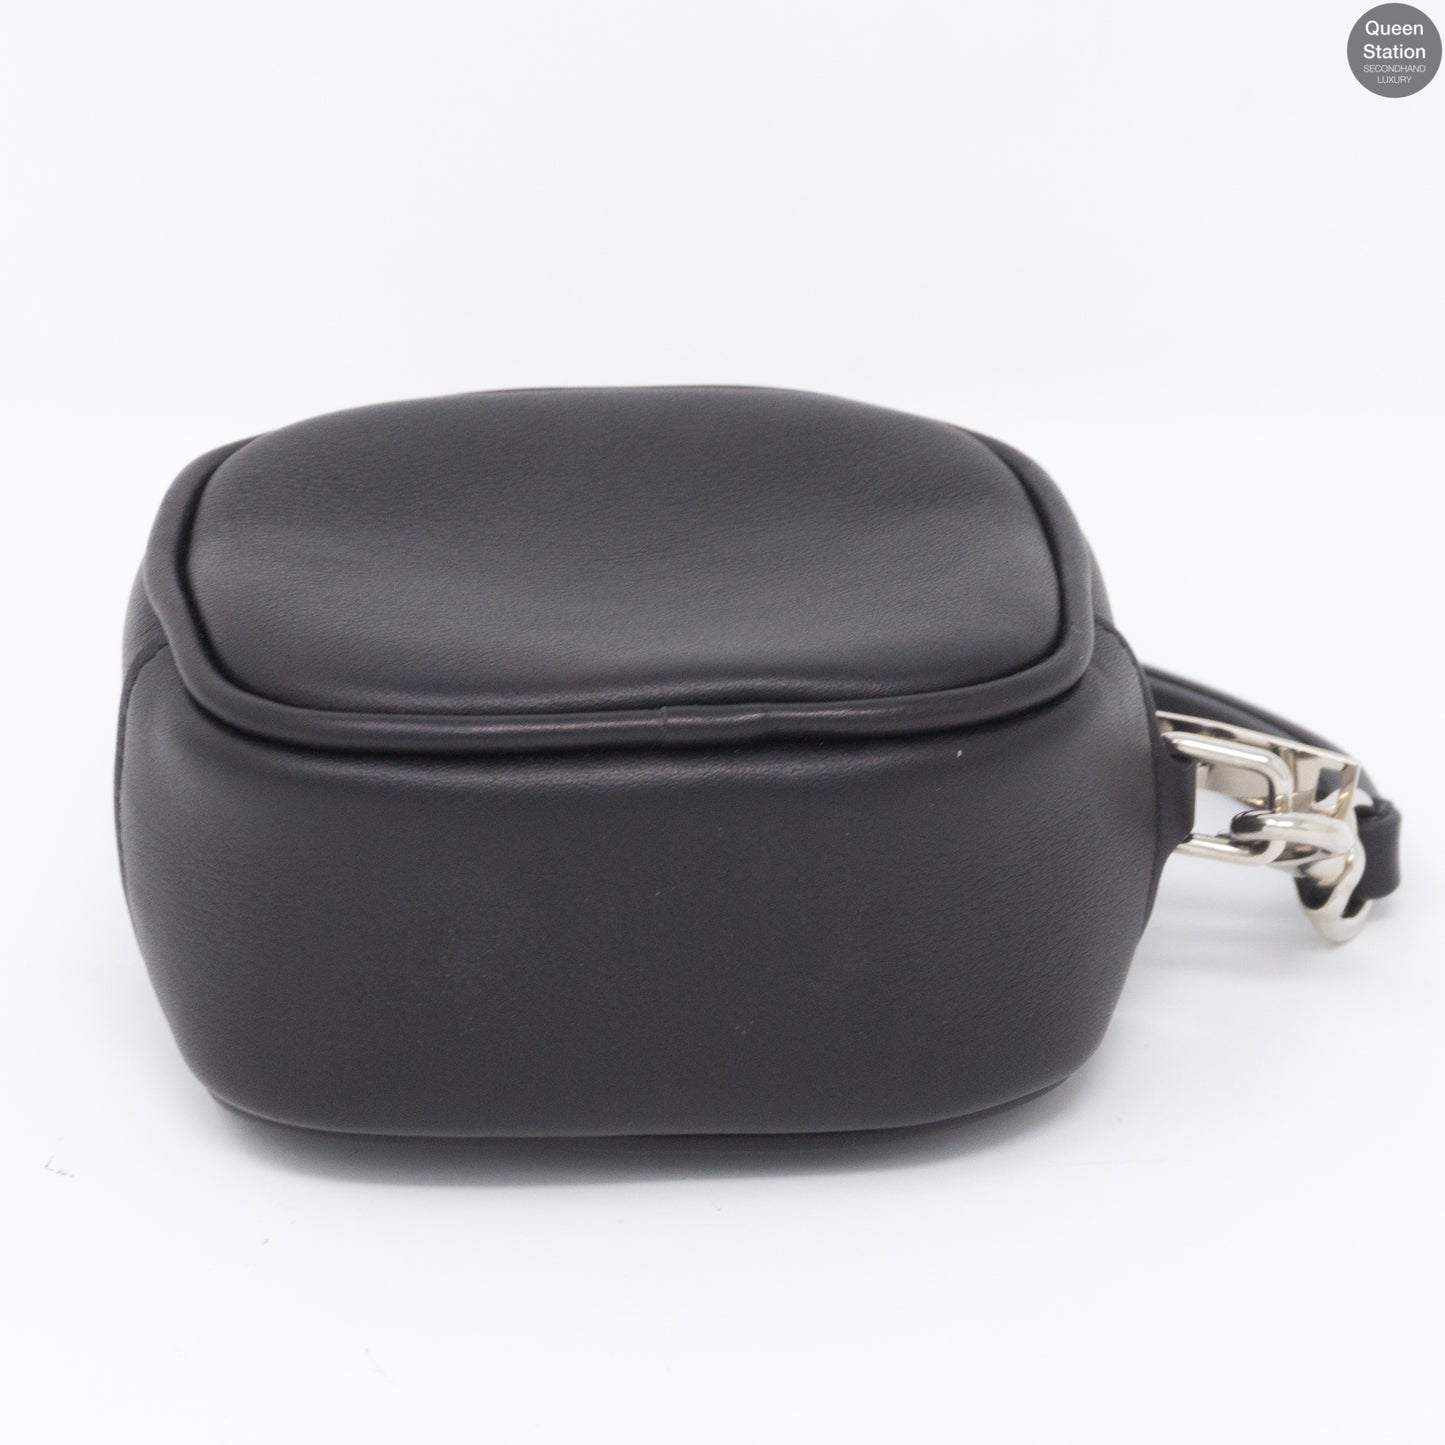 Monogrammed Black Leather Key Pouch